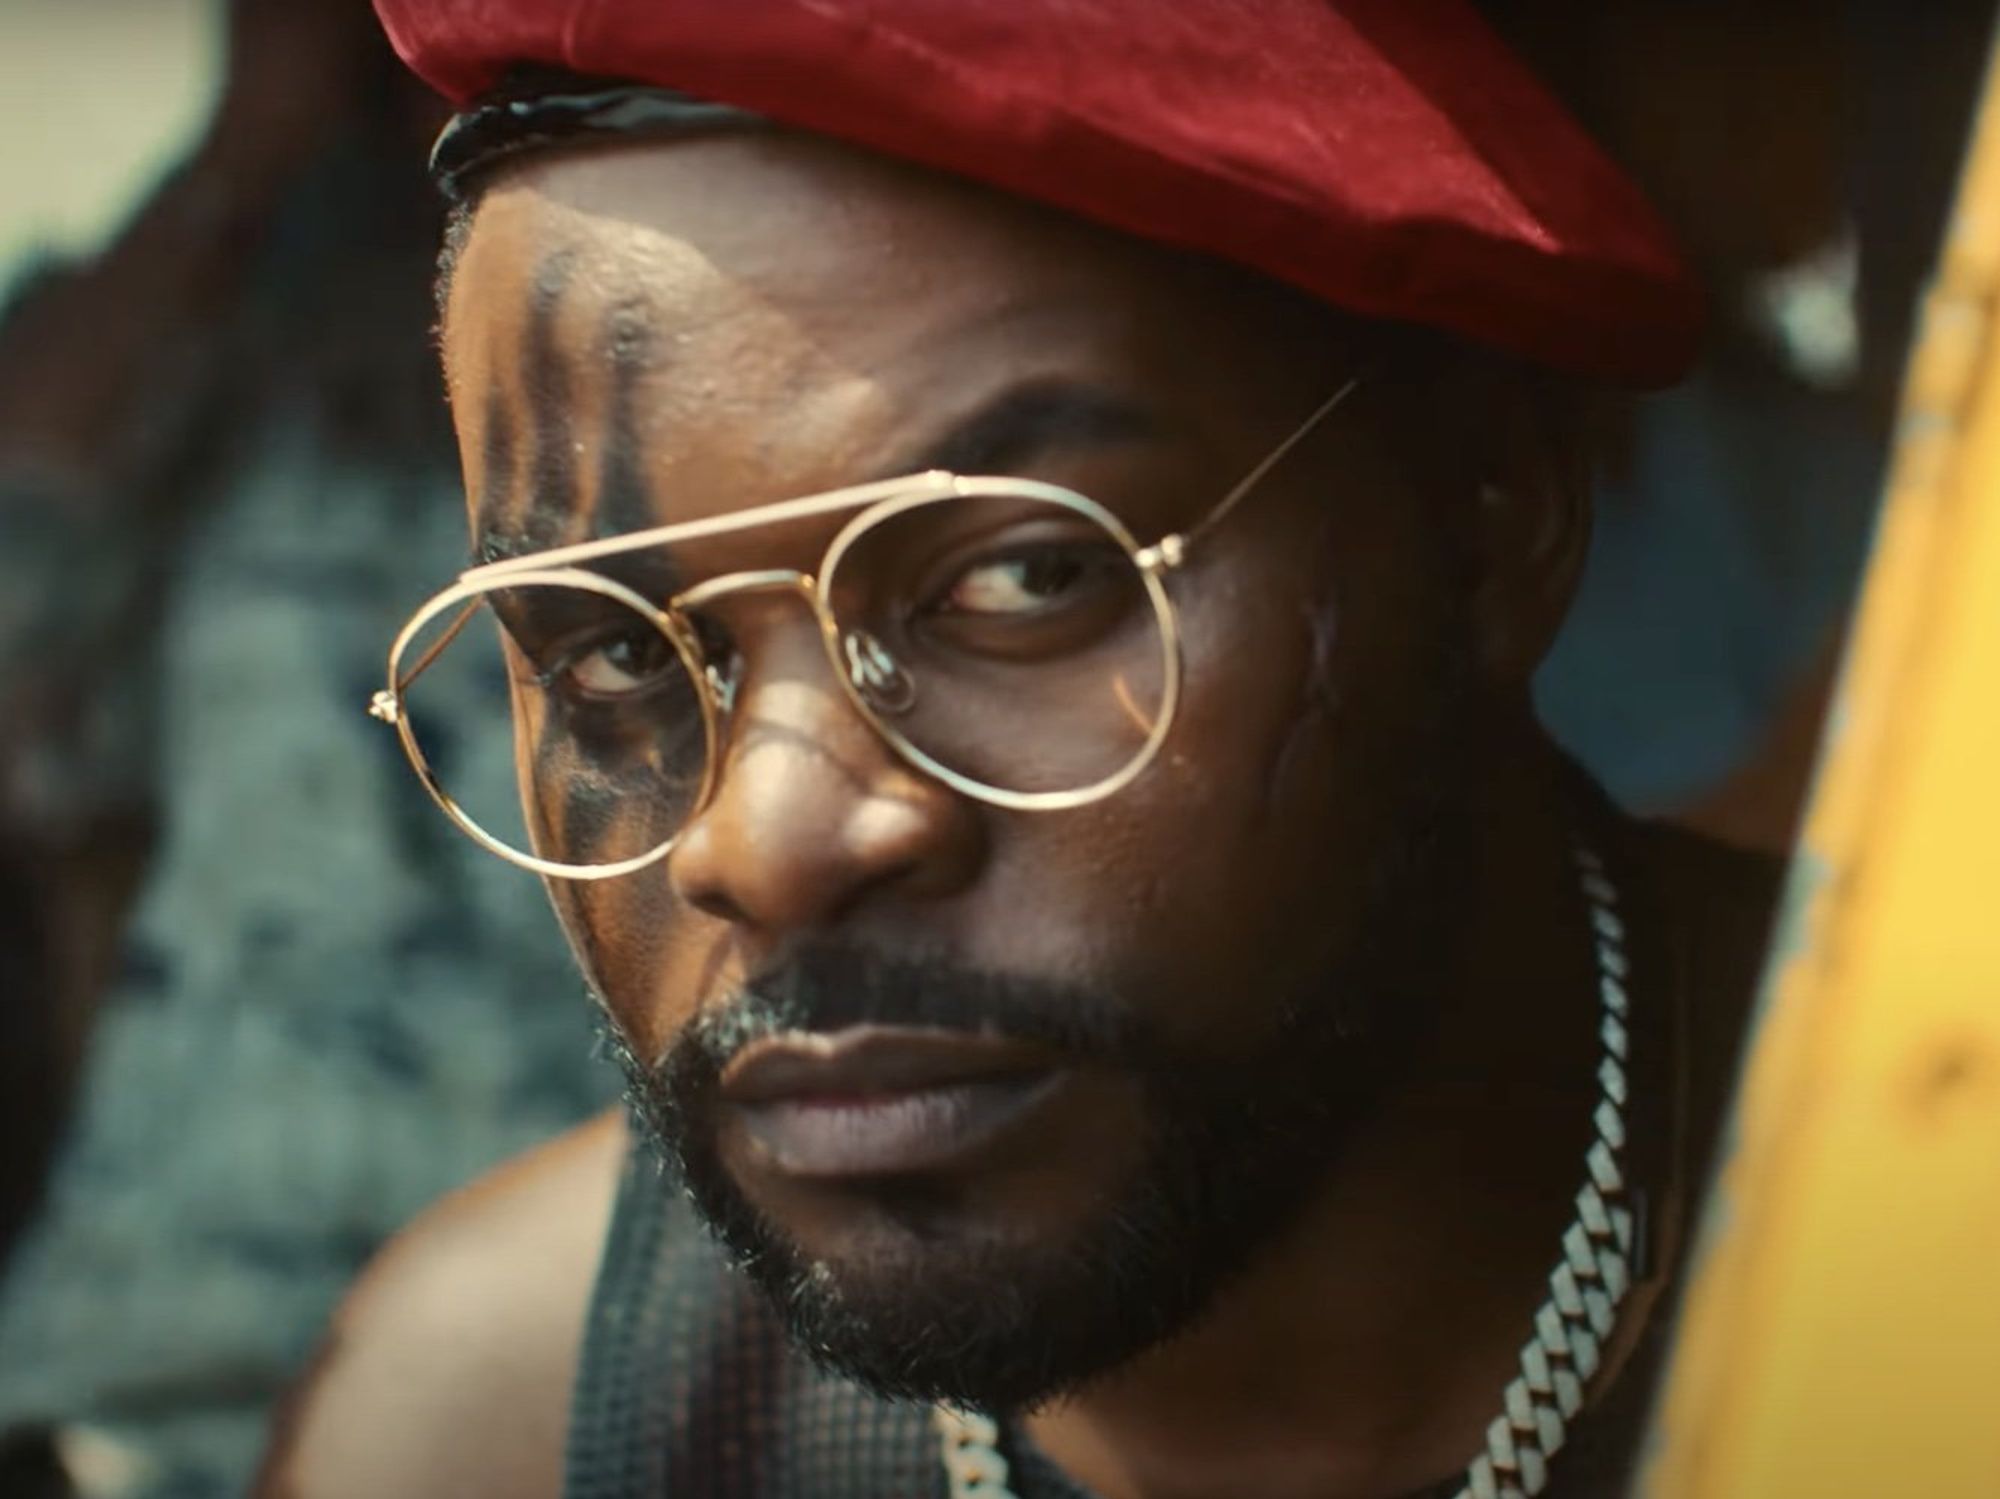 Falz wearing glasses and a red hat